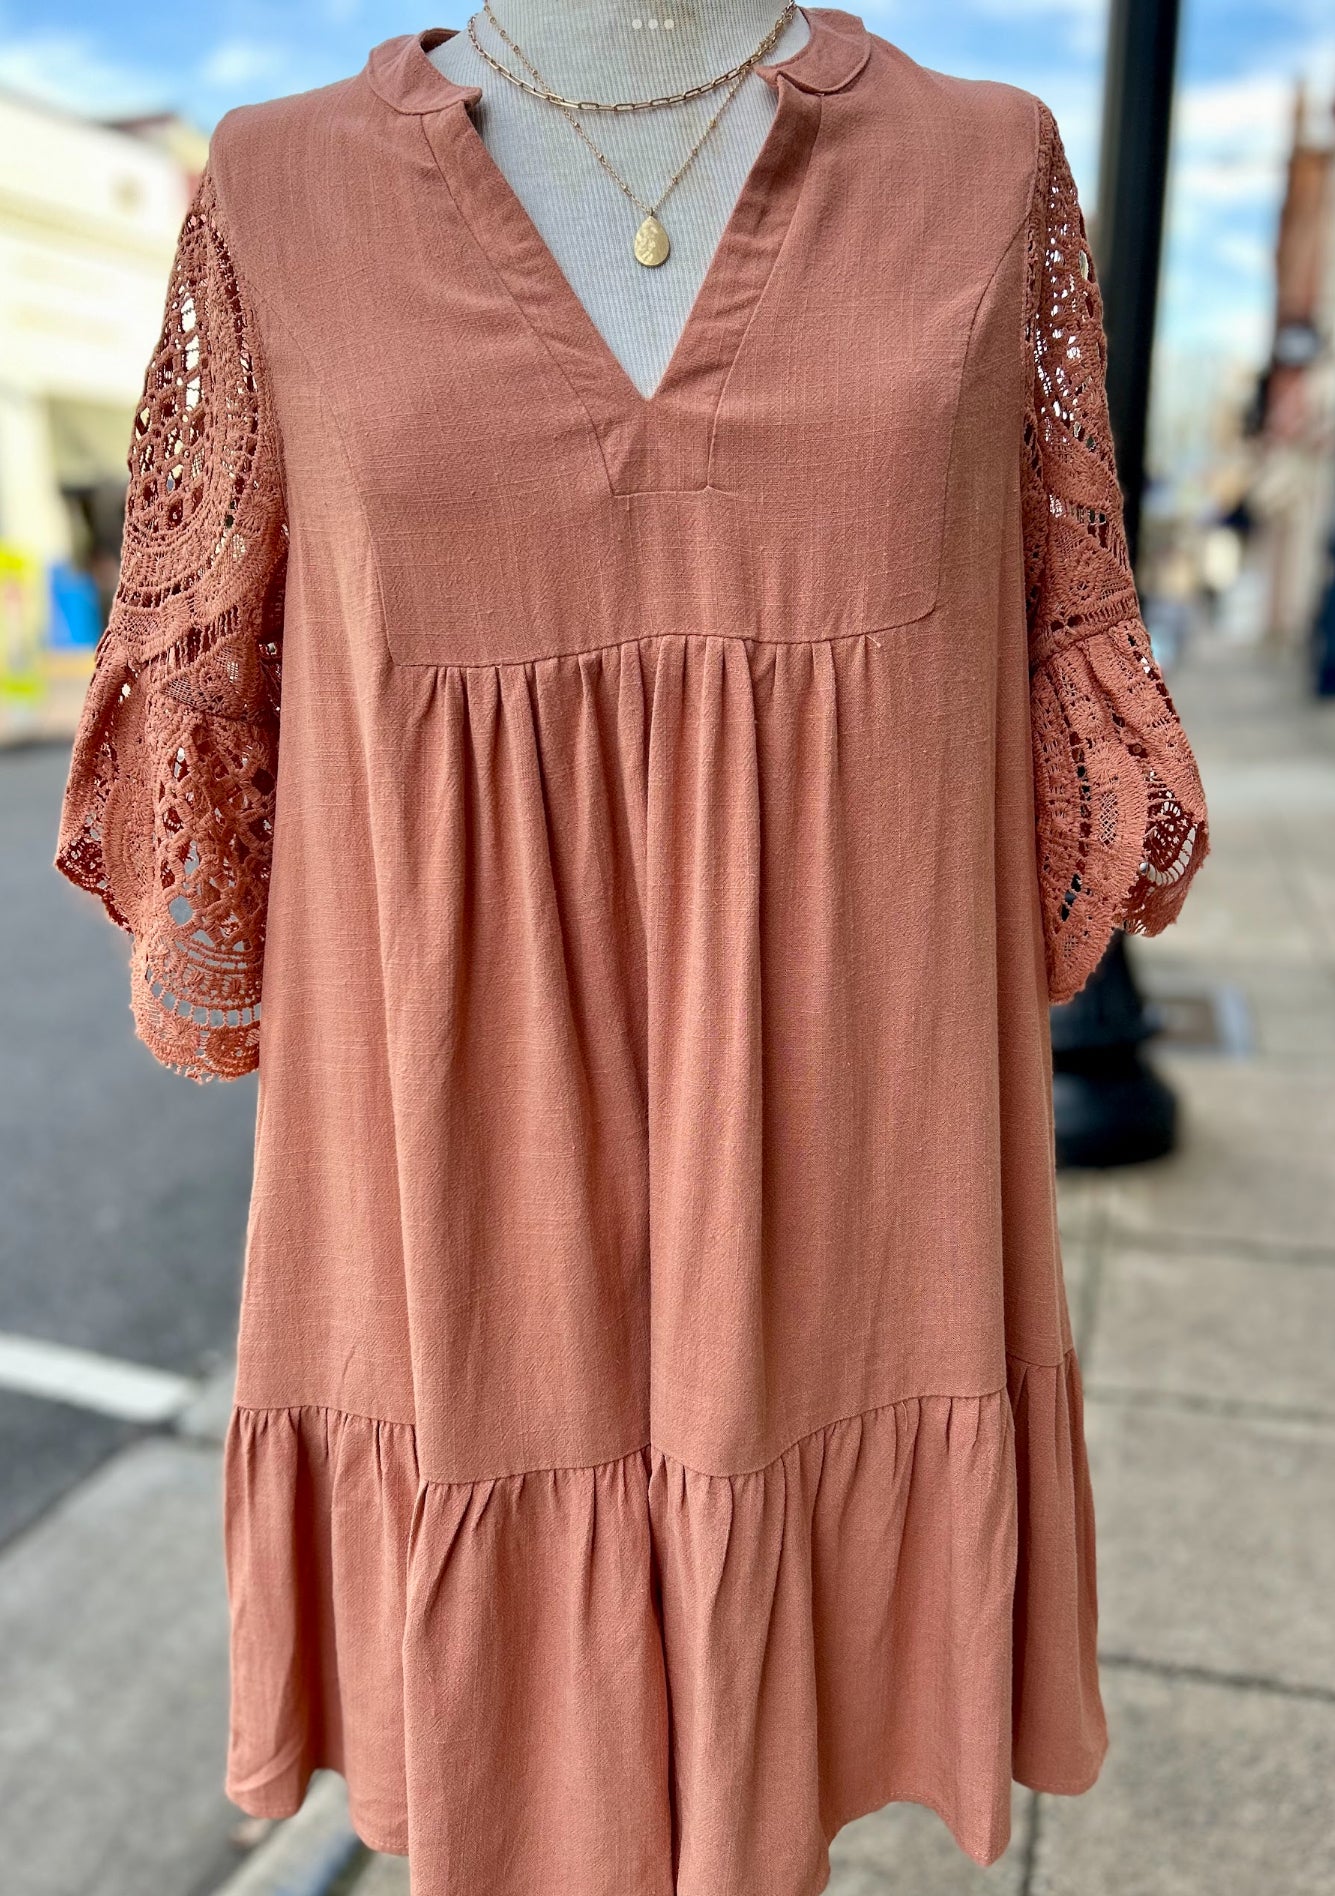 Dresses - The Rusty Willow Boutique